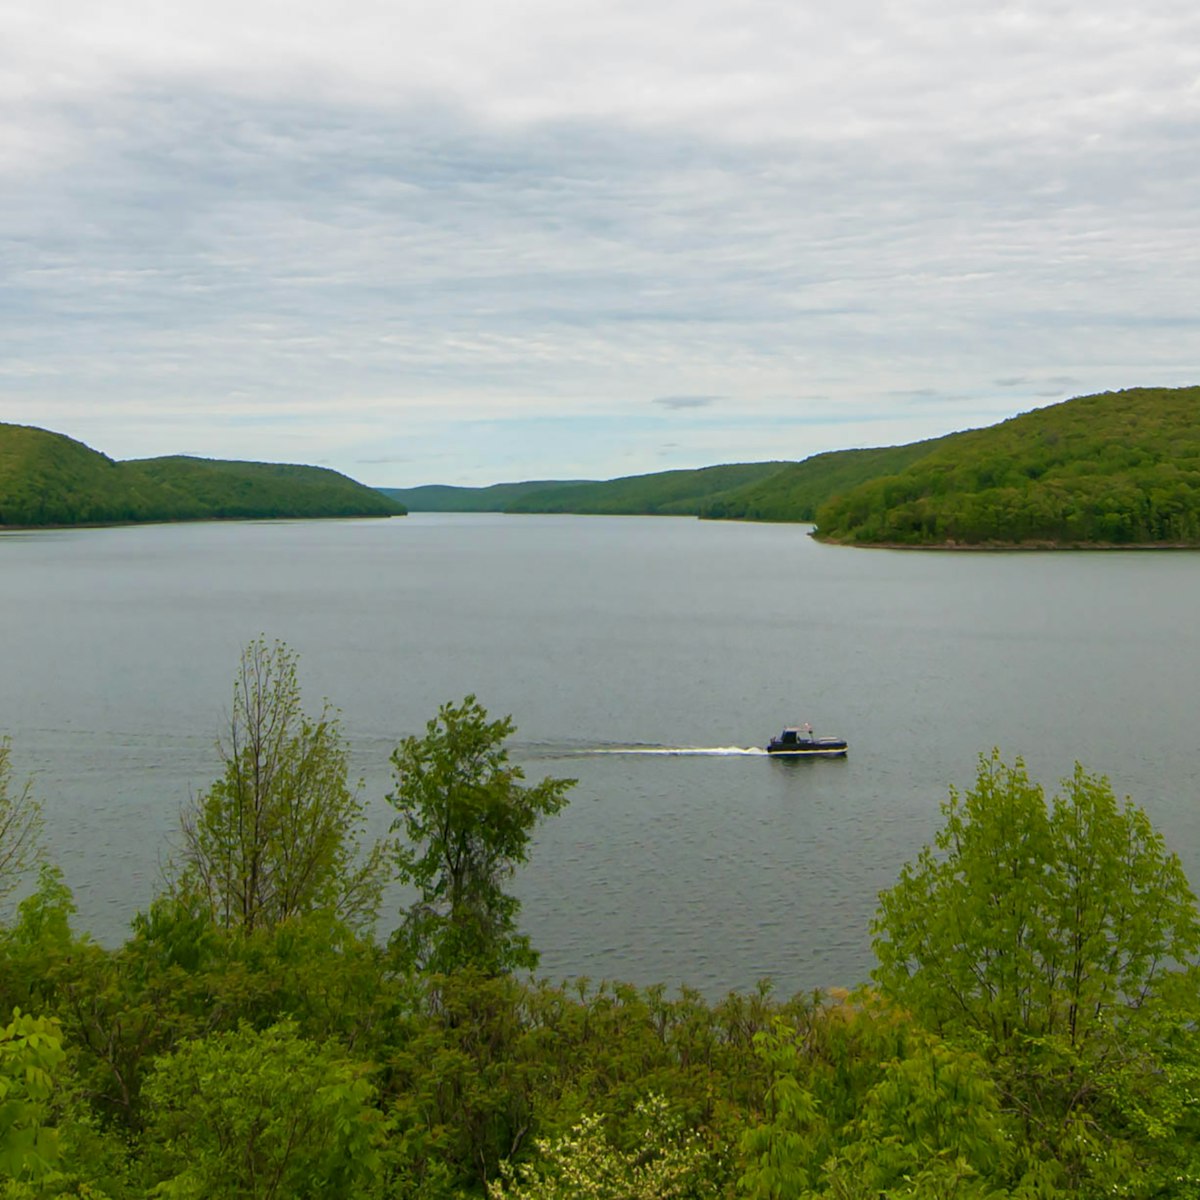 The Allegheny Reservoir in Warren County, Pennsylvania, USA behind Kinzua Dam on a spring day with a houseboat on the water
1152322706
warren, warren county, outdoor, landscape, green, beautiful, allegheny, kinzua, trail, america, scenic, view, county, mountains, states, appalachian, hills, vacation, scenery, destination, country, woods, countryside, northwestern, allegheny reservoir, spring day, overlook, house boat, recreation